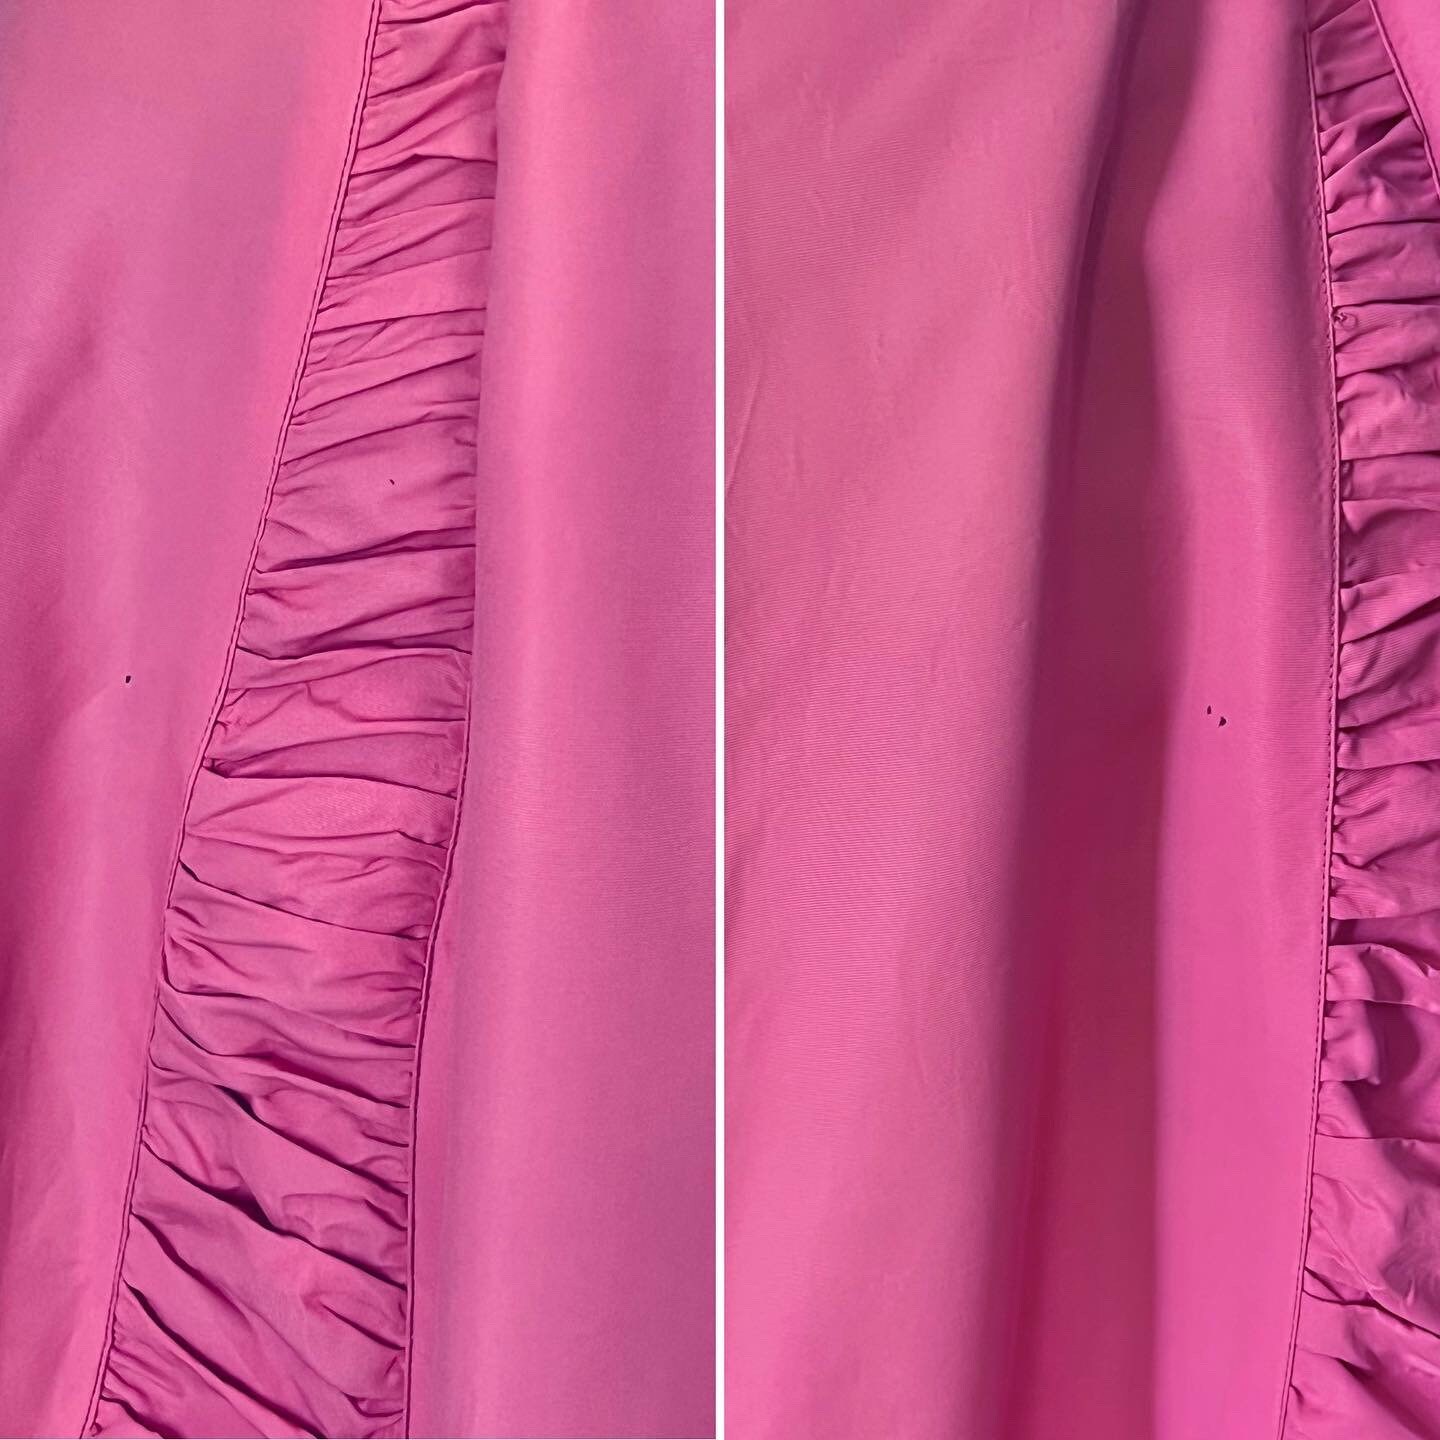 Stunning Early 1940s New York Creation Pink Rayon Taffeta Gown - Etsy